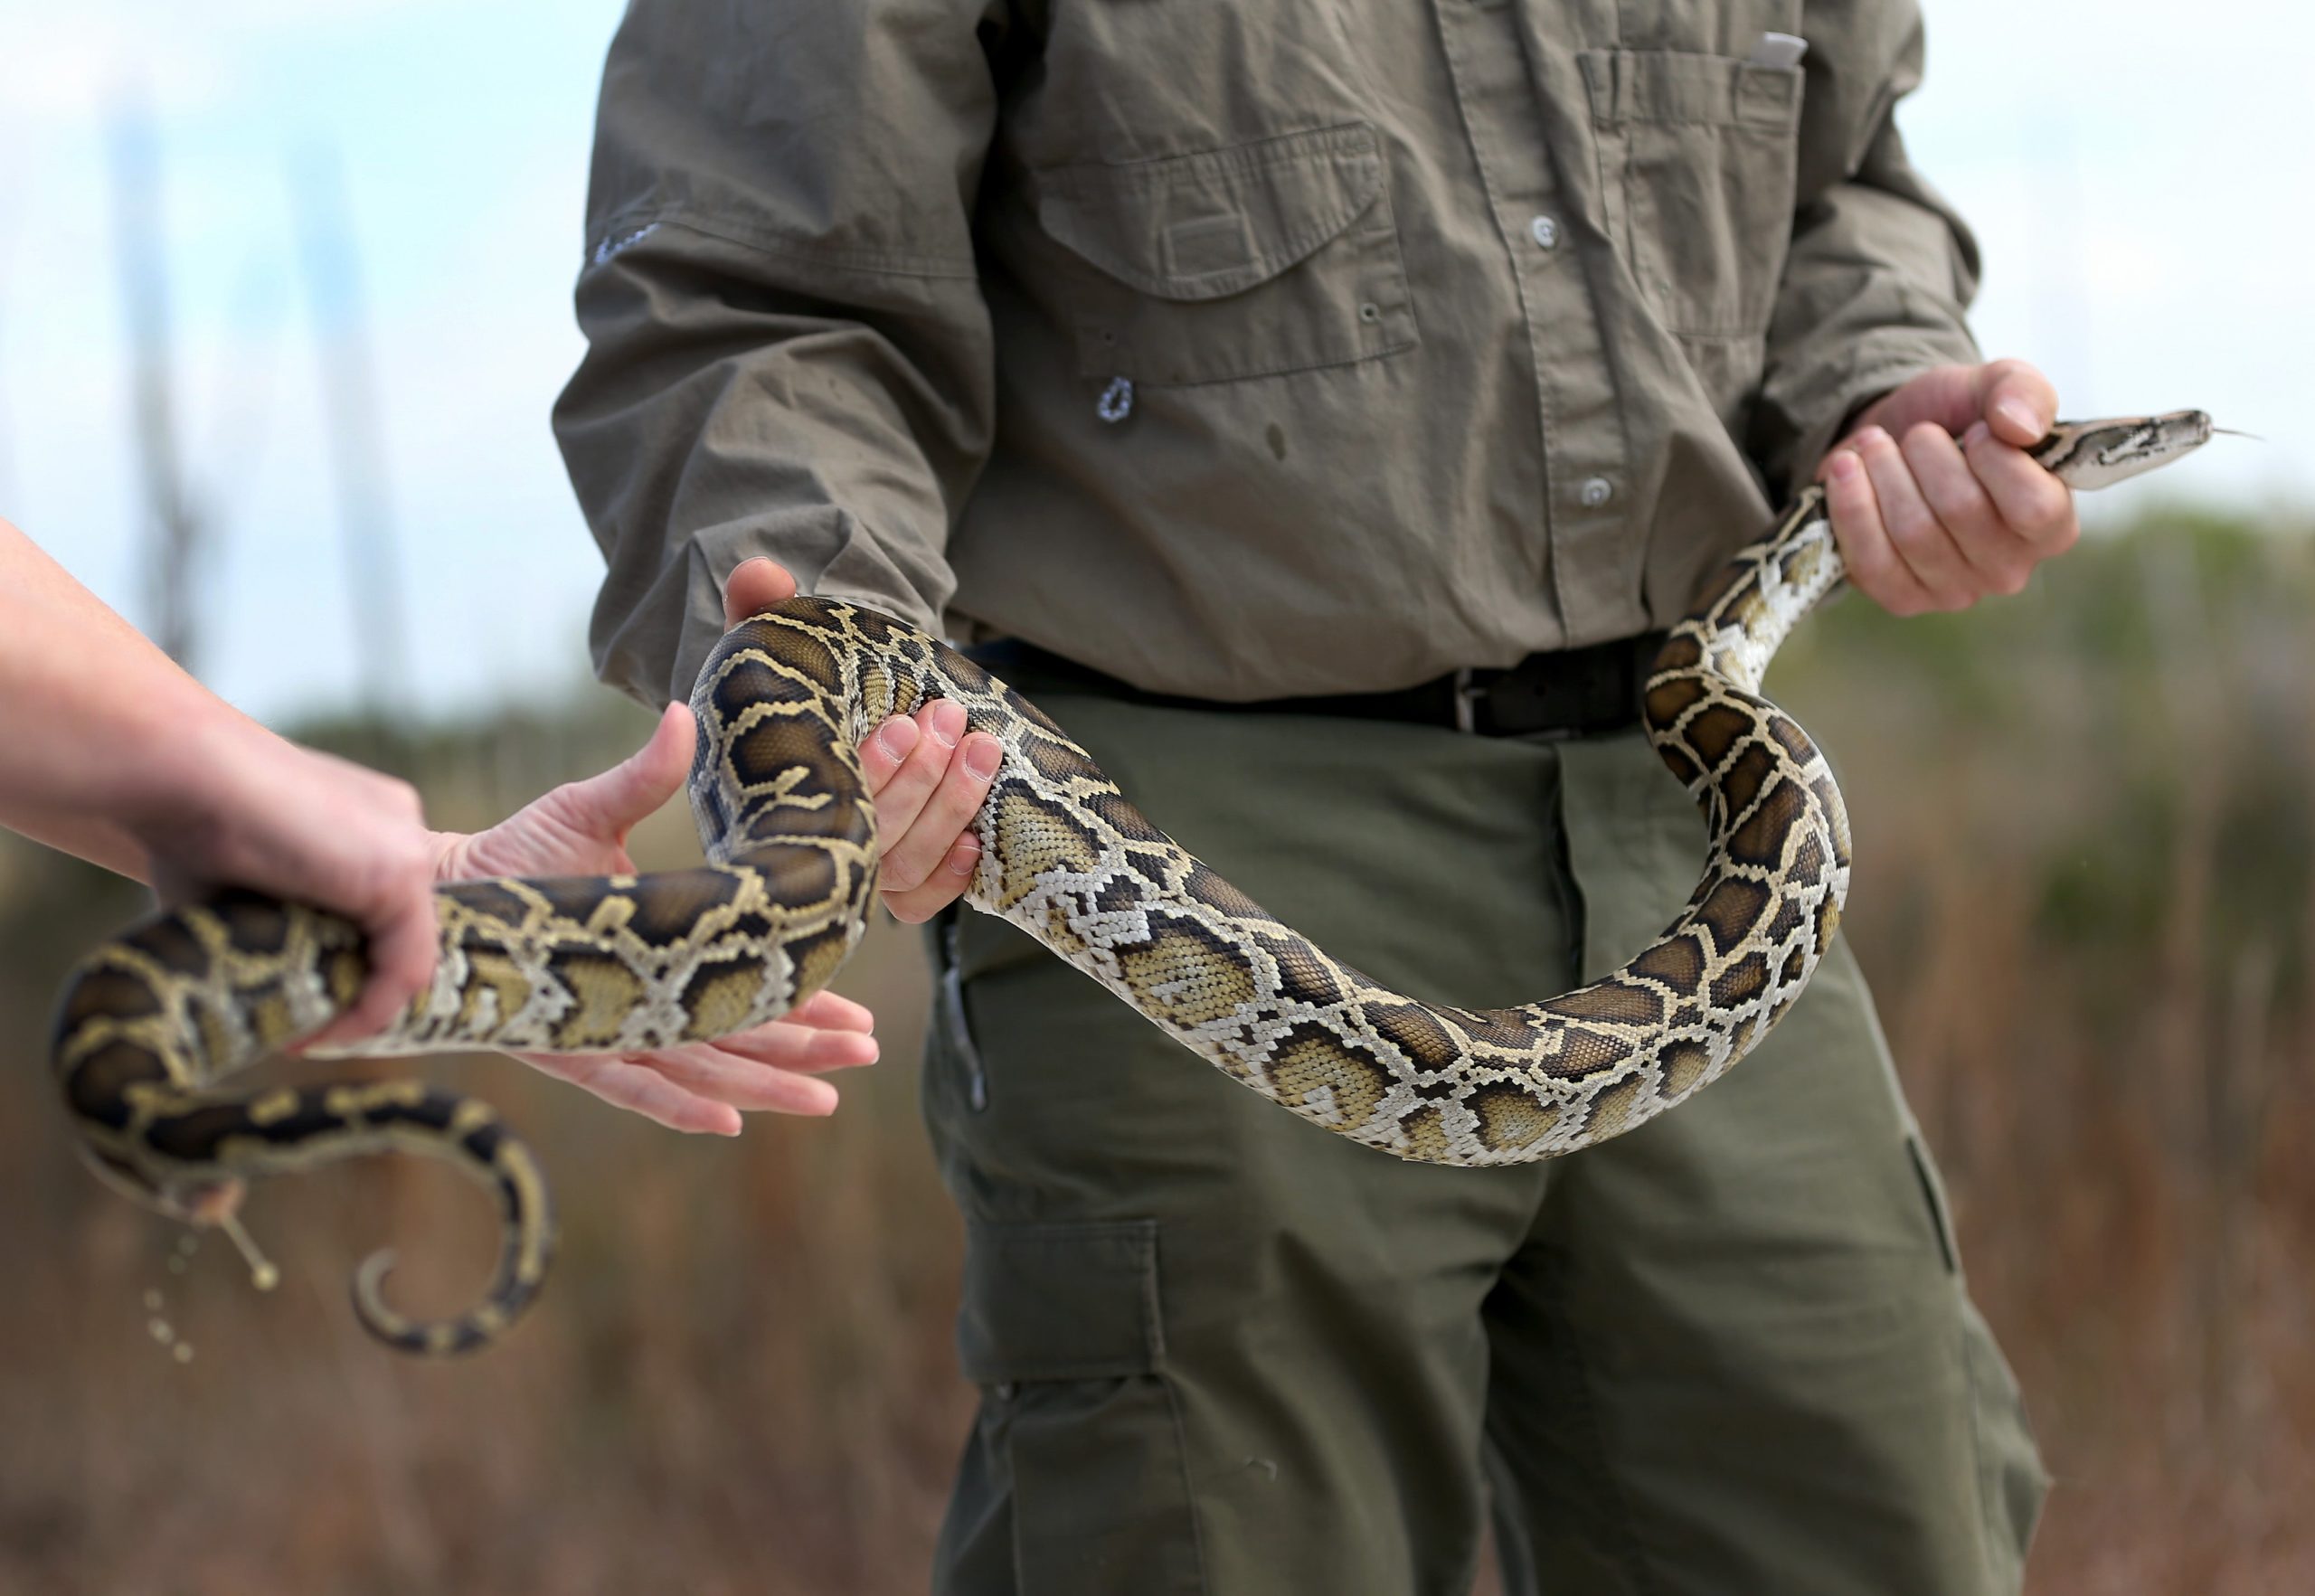  A Burmese Python being held by wildlife experts during a press conference in the Florida Everglades about the non-native species on January 29, 2015 in Miami, Florida.  (Photo: Joe Raedle, Getty Images)